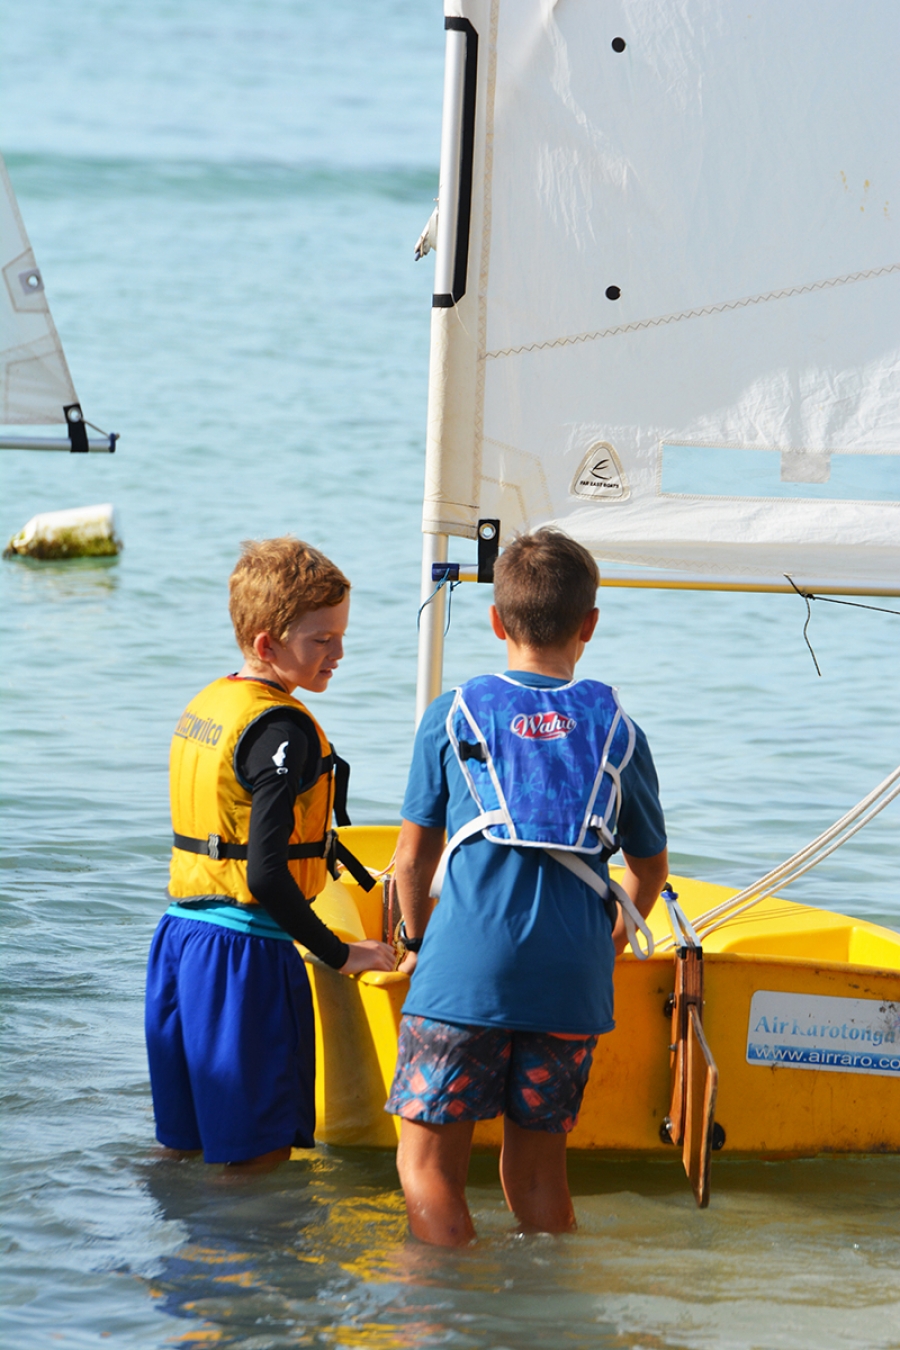 Sailing proves popular with pupils